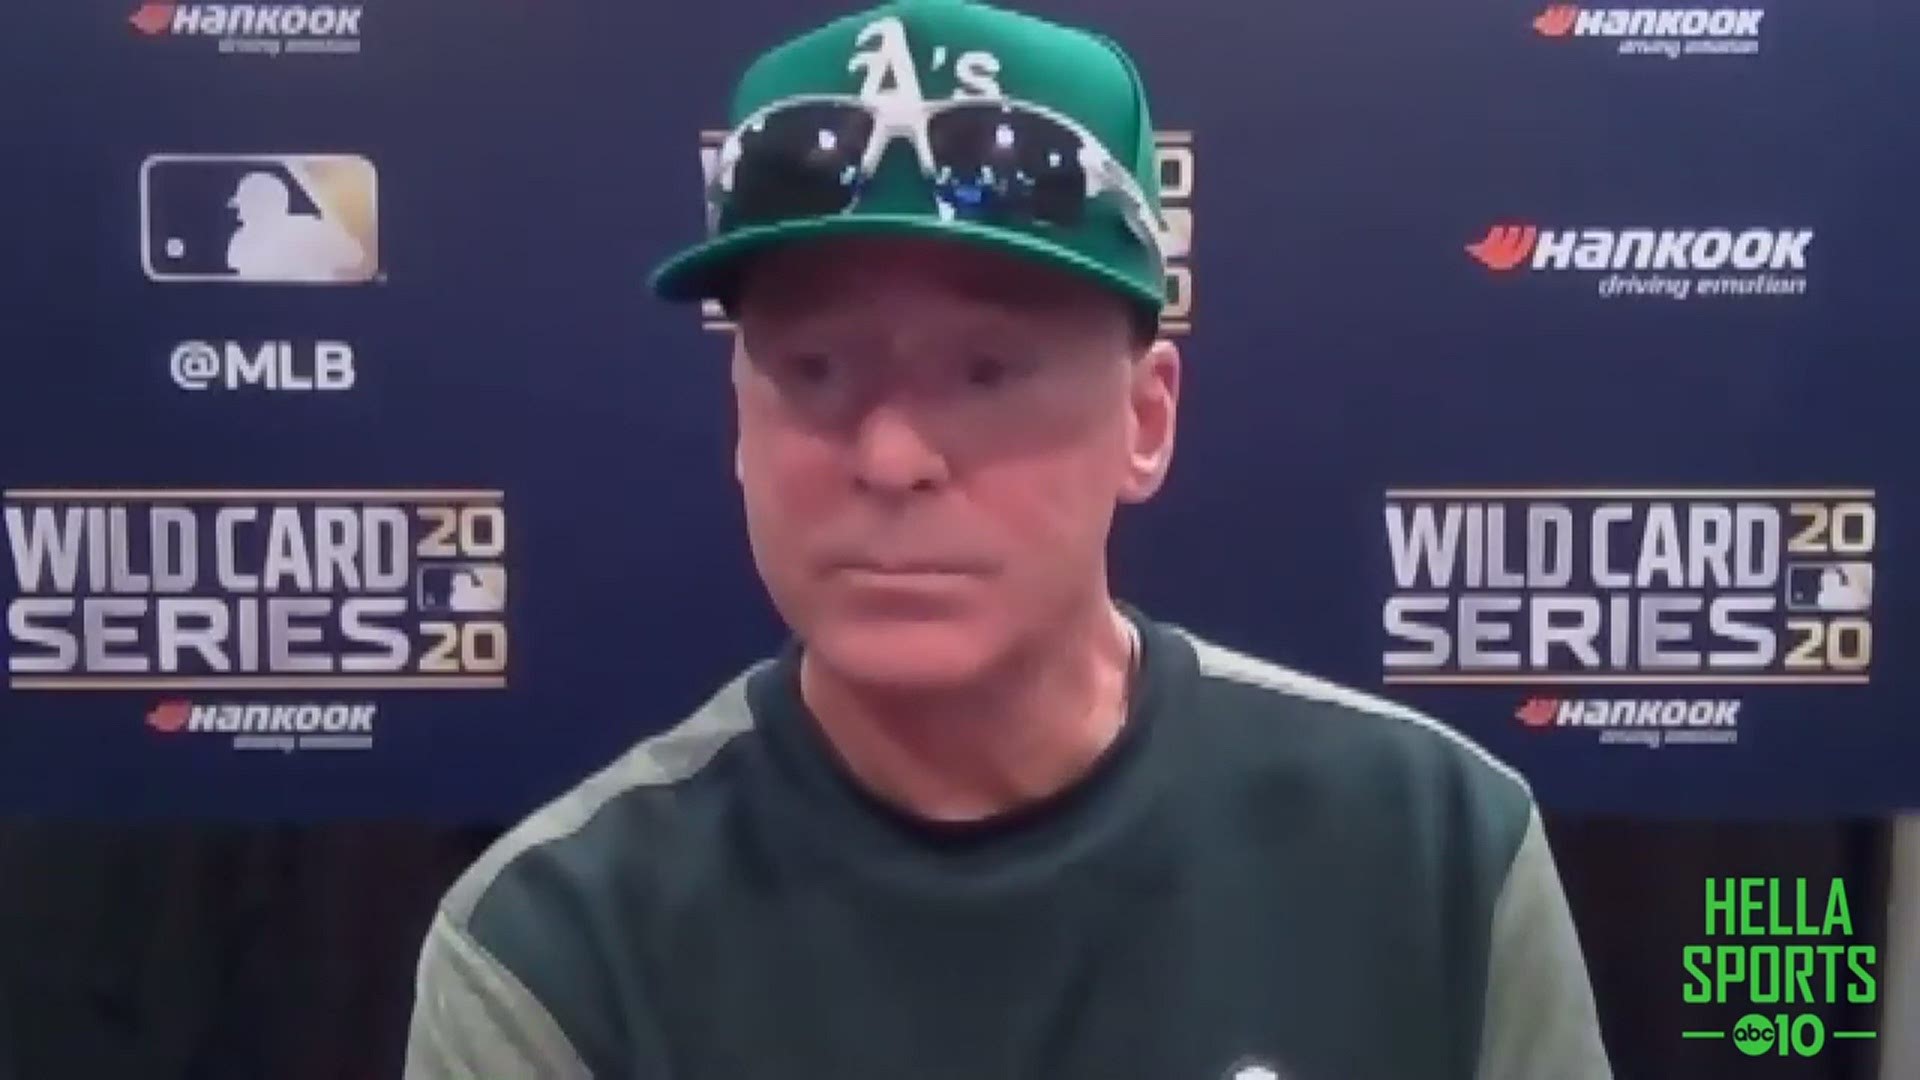 Oakland A's manager Bob Melvin talks about Wednesday's 5-3 win in Game Two on Wednesday over the Chicago White Sox to force a series deciding Game 3 on Thursday.